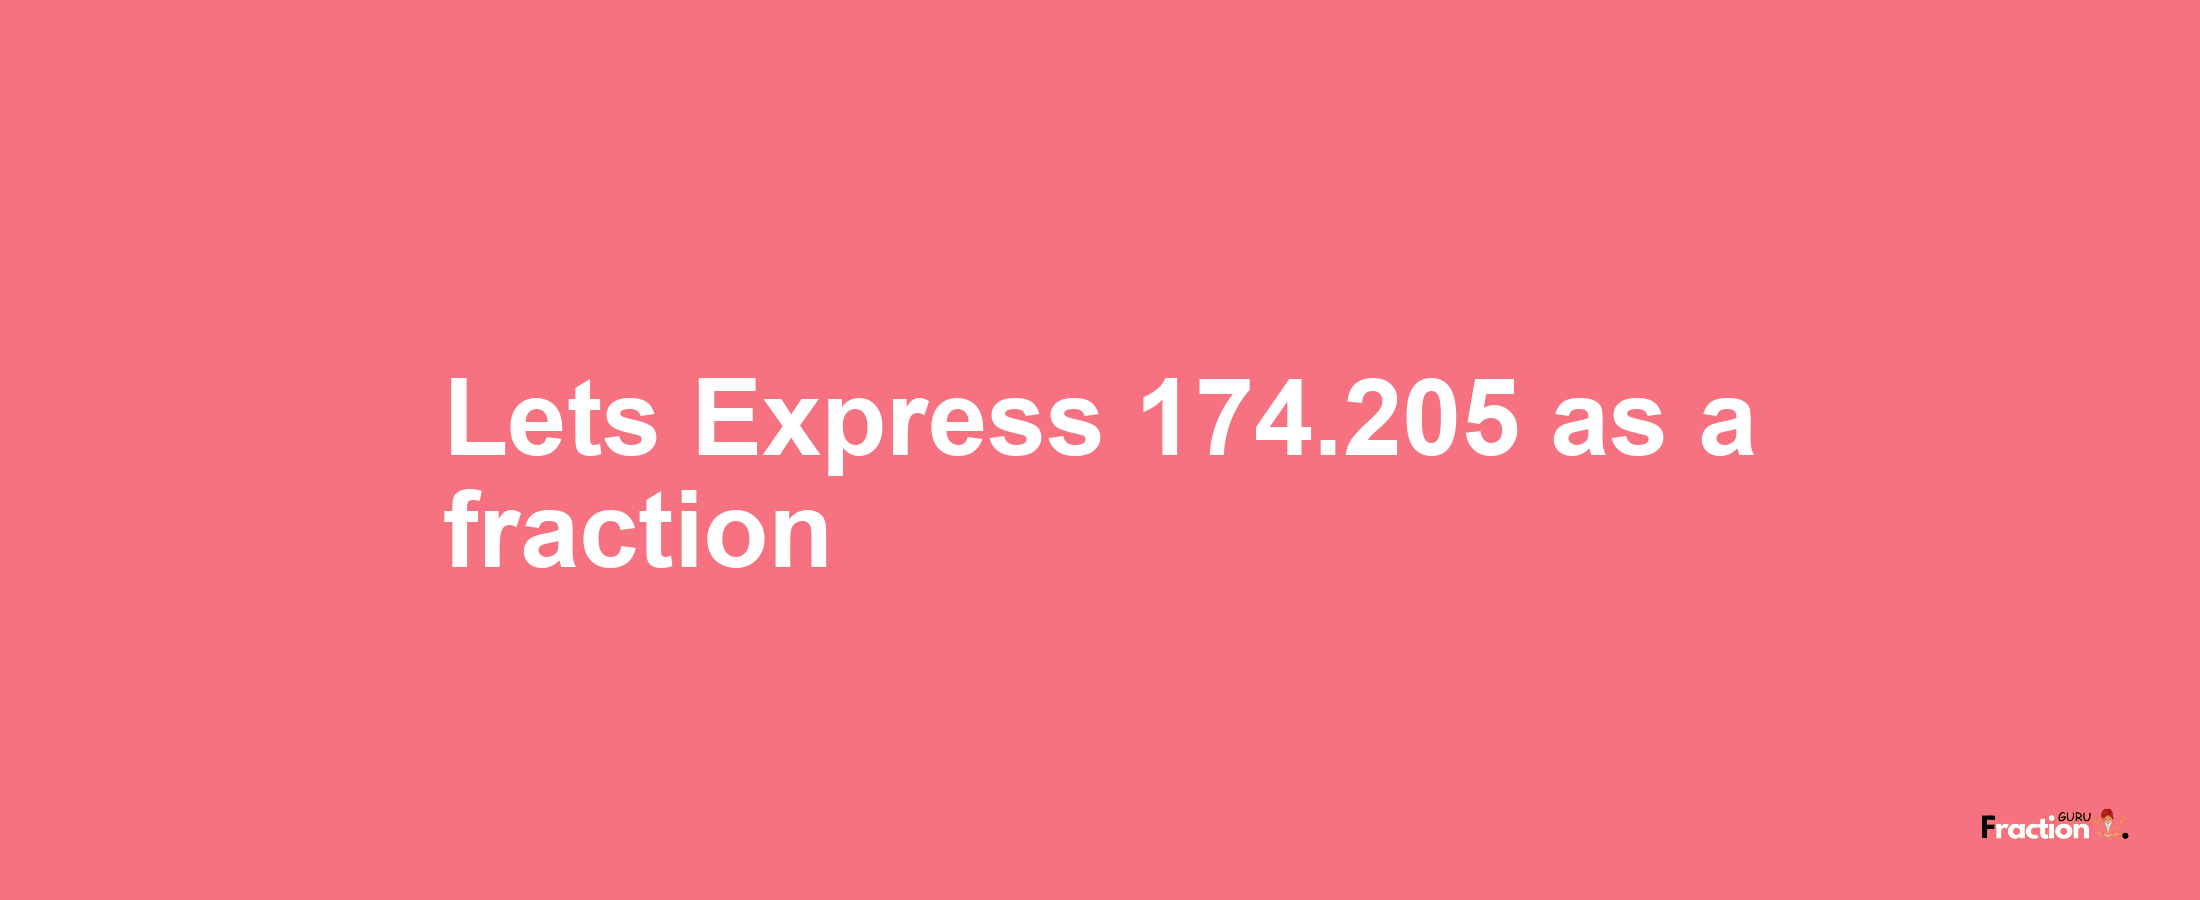 Lets Express 174.205 as afraction